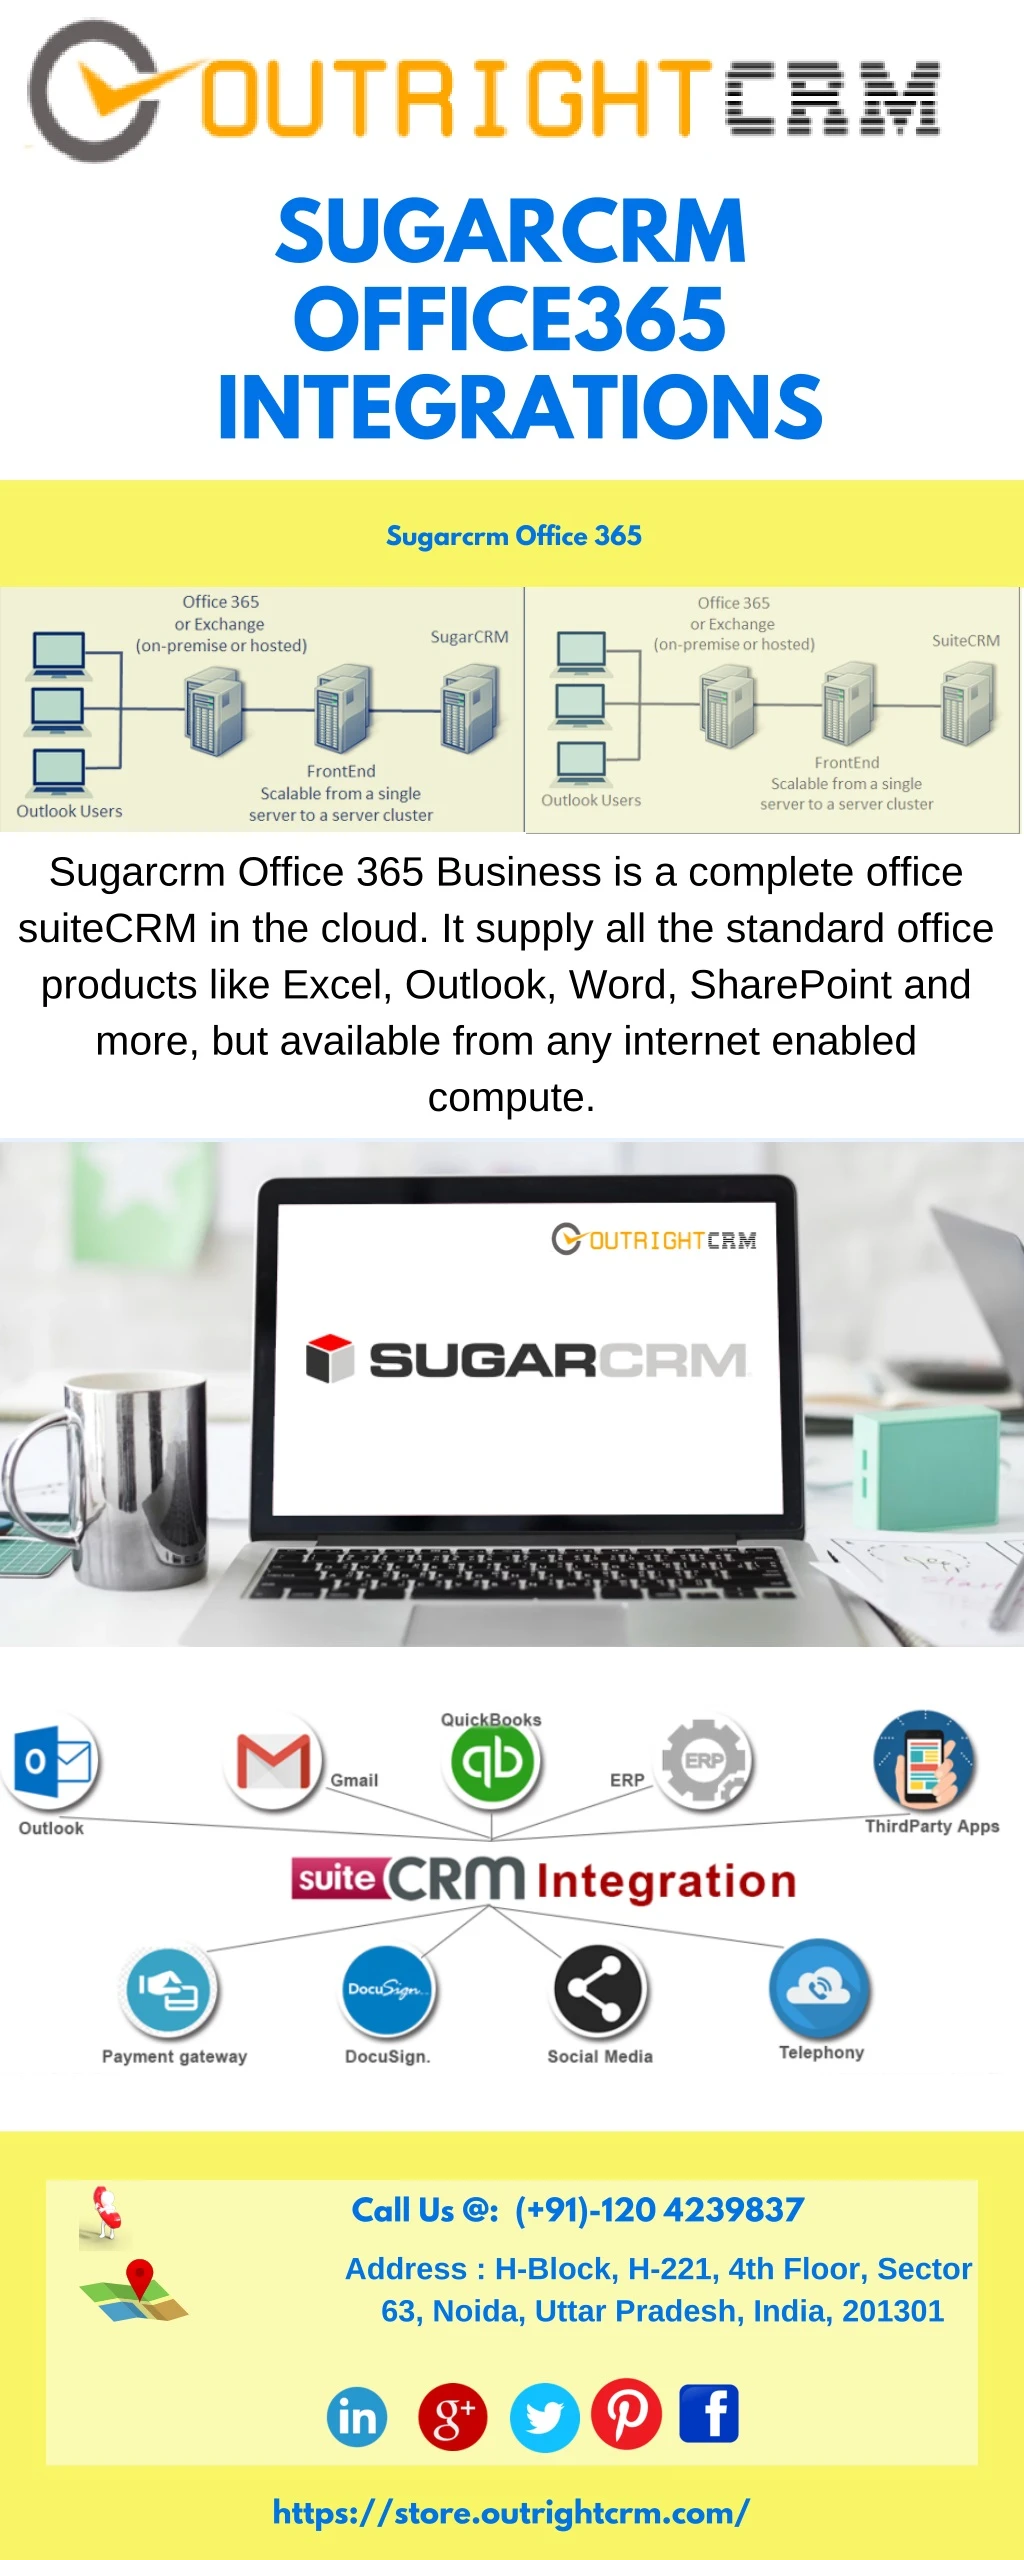 sugarcrm office365 integrations